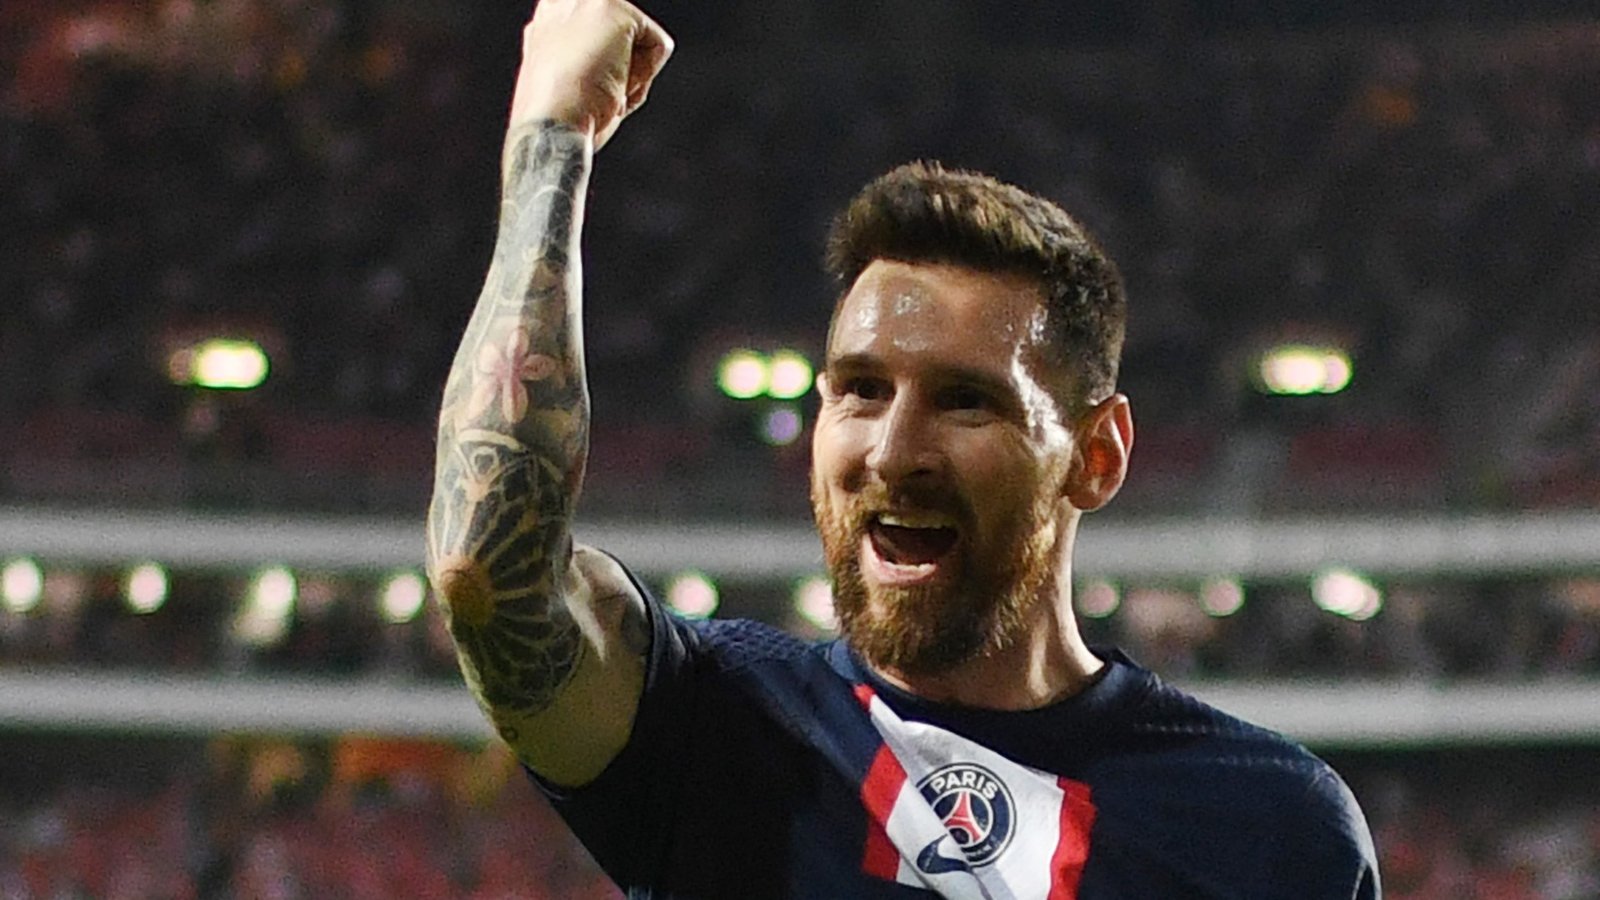 No Player in Europe's Top Five Leagues Comes Near to Messi in this Sensational Goal Statistics